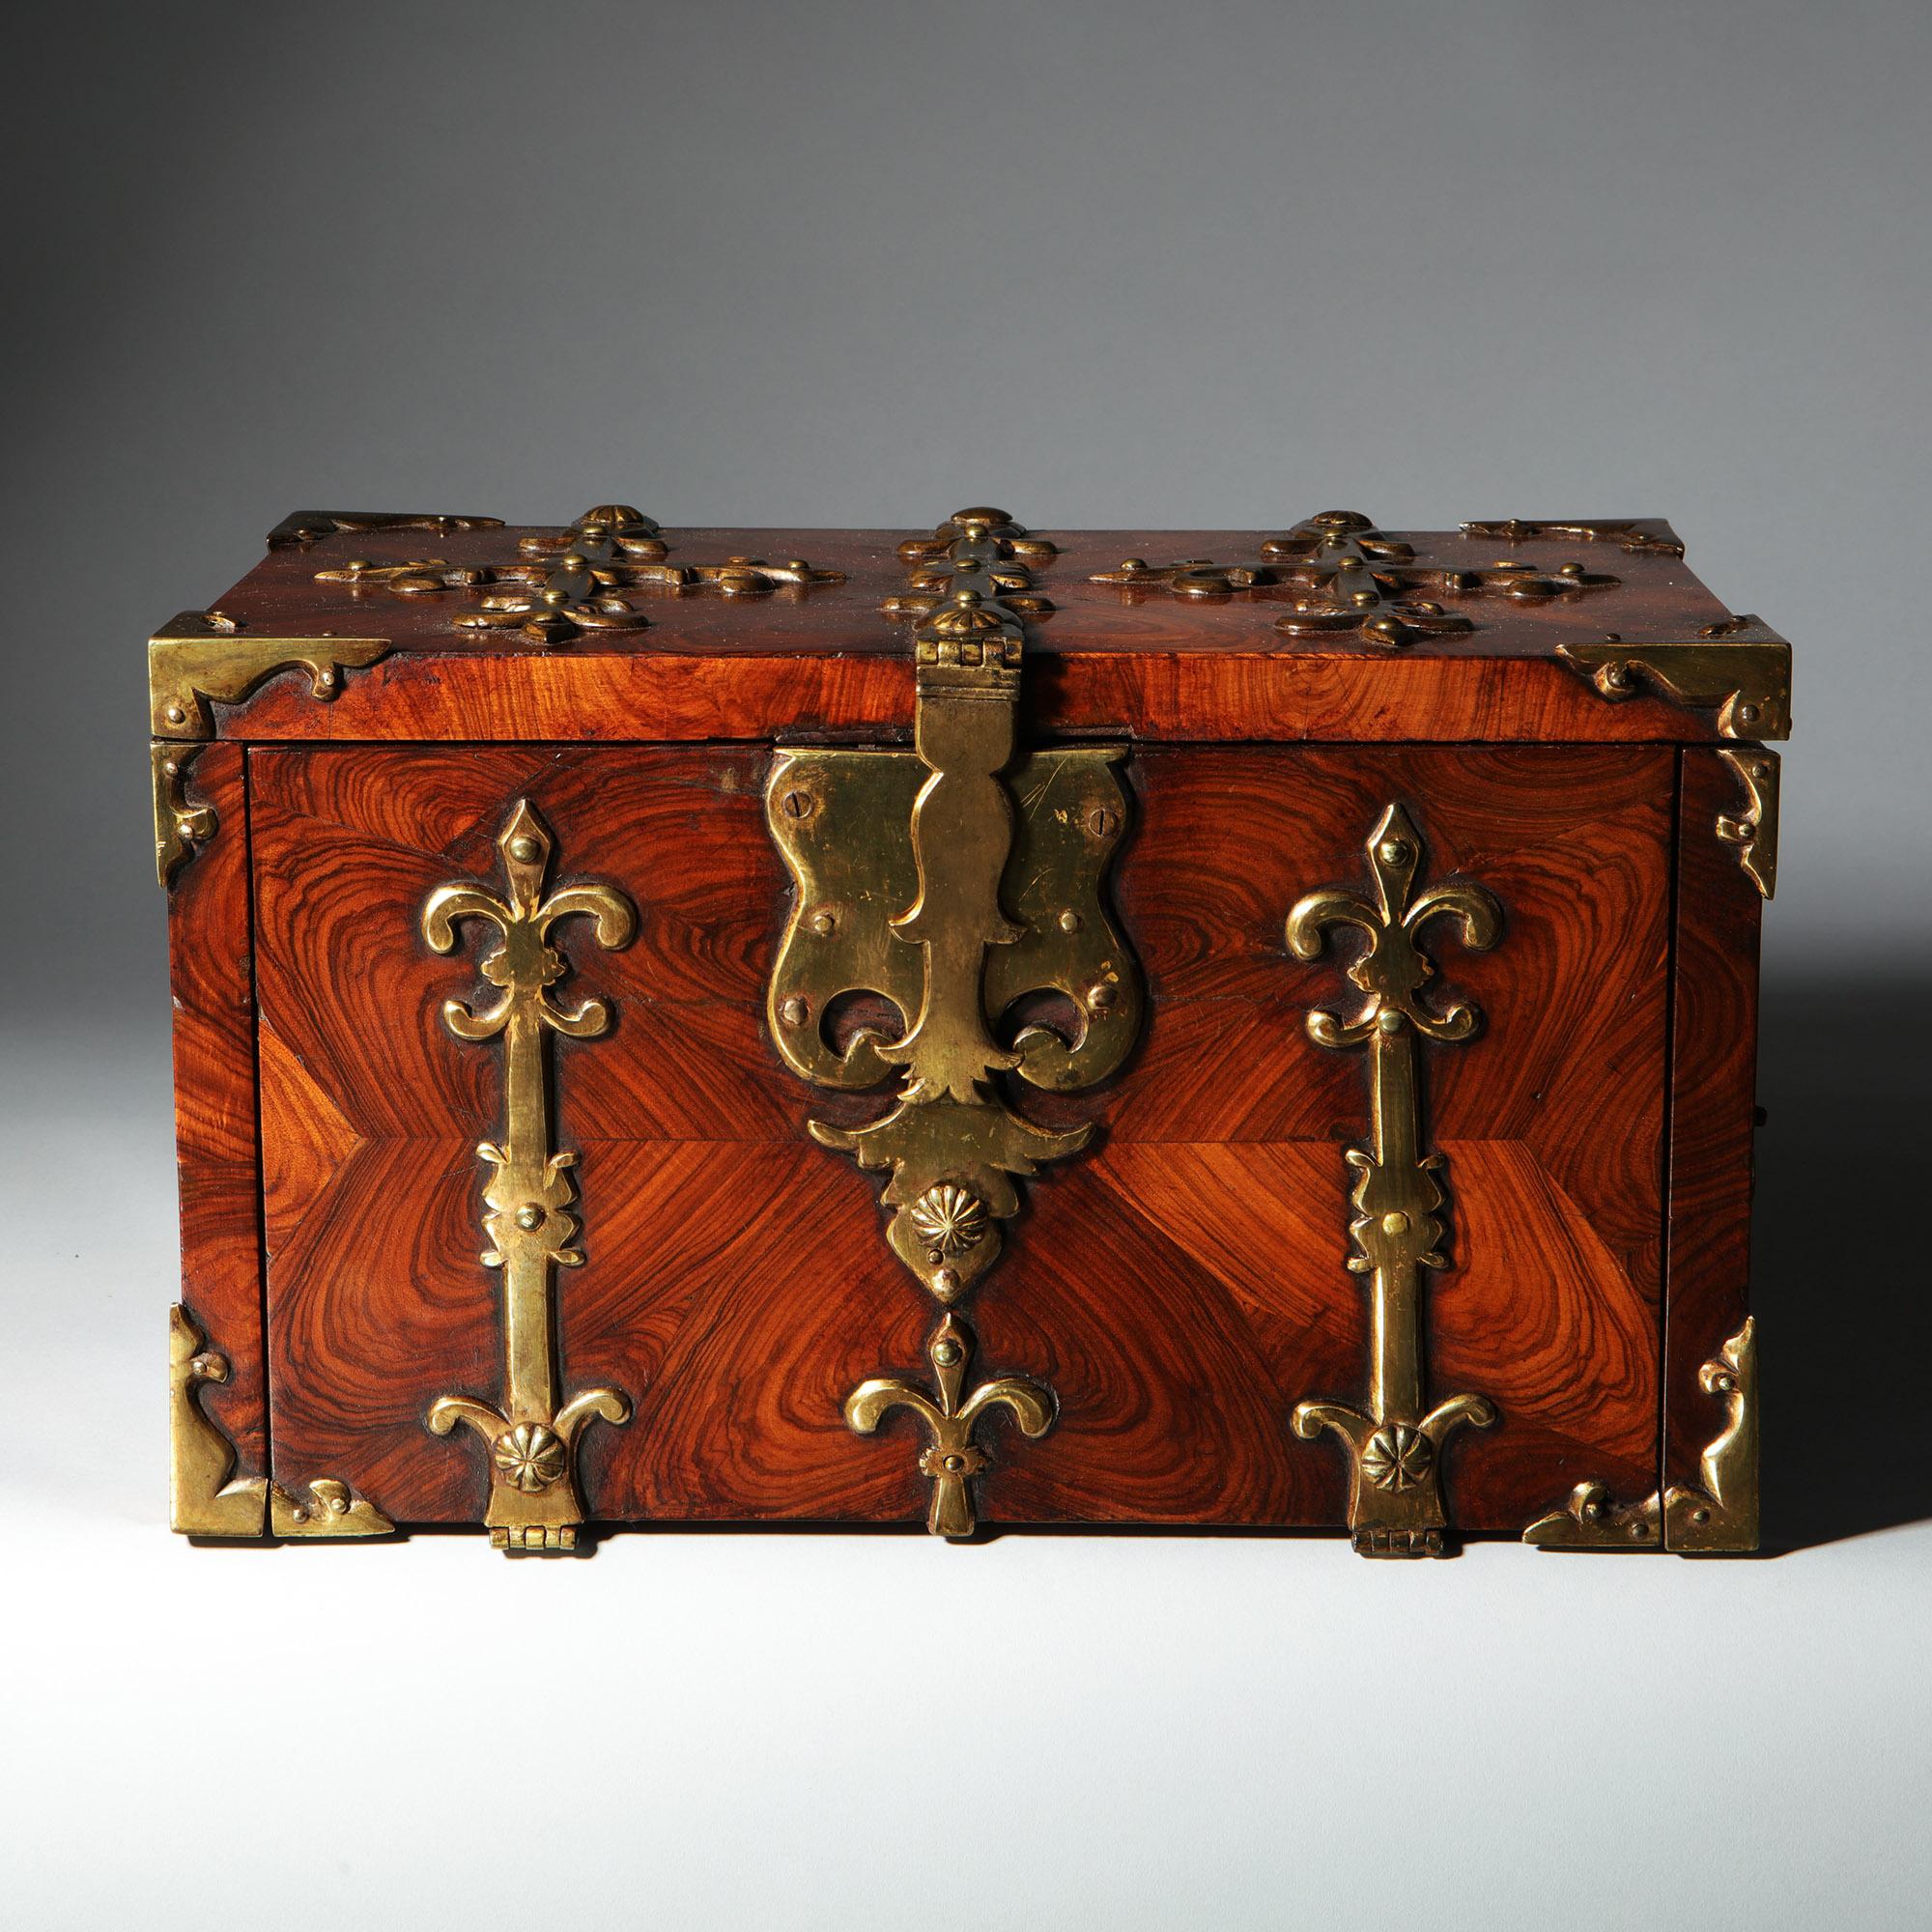 A William and Mary Kingwood/Princes oyster strongbox or Coffre Fort, circa 1680-1700, England. Adorned with highly decorative gilt brass strapwork and decorated in knife-cut oysters of kingwood, this box is fit for the most discerning of collectors.